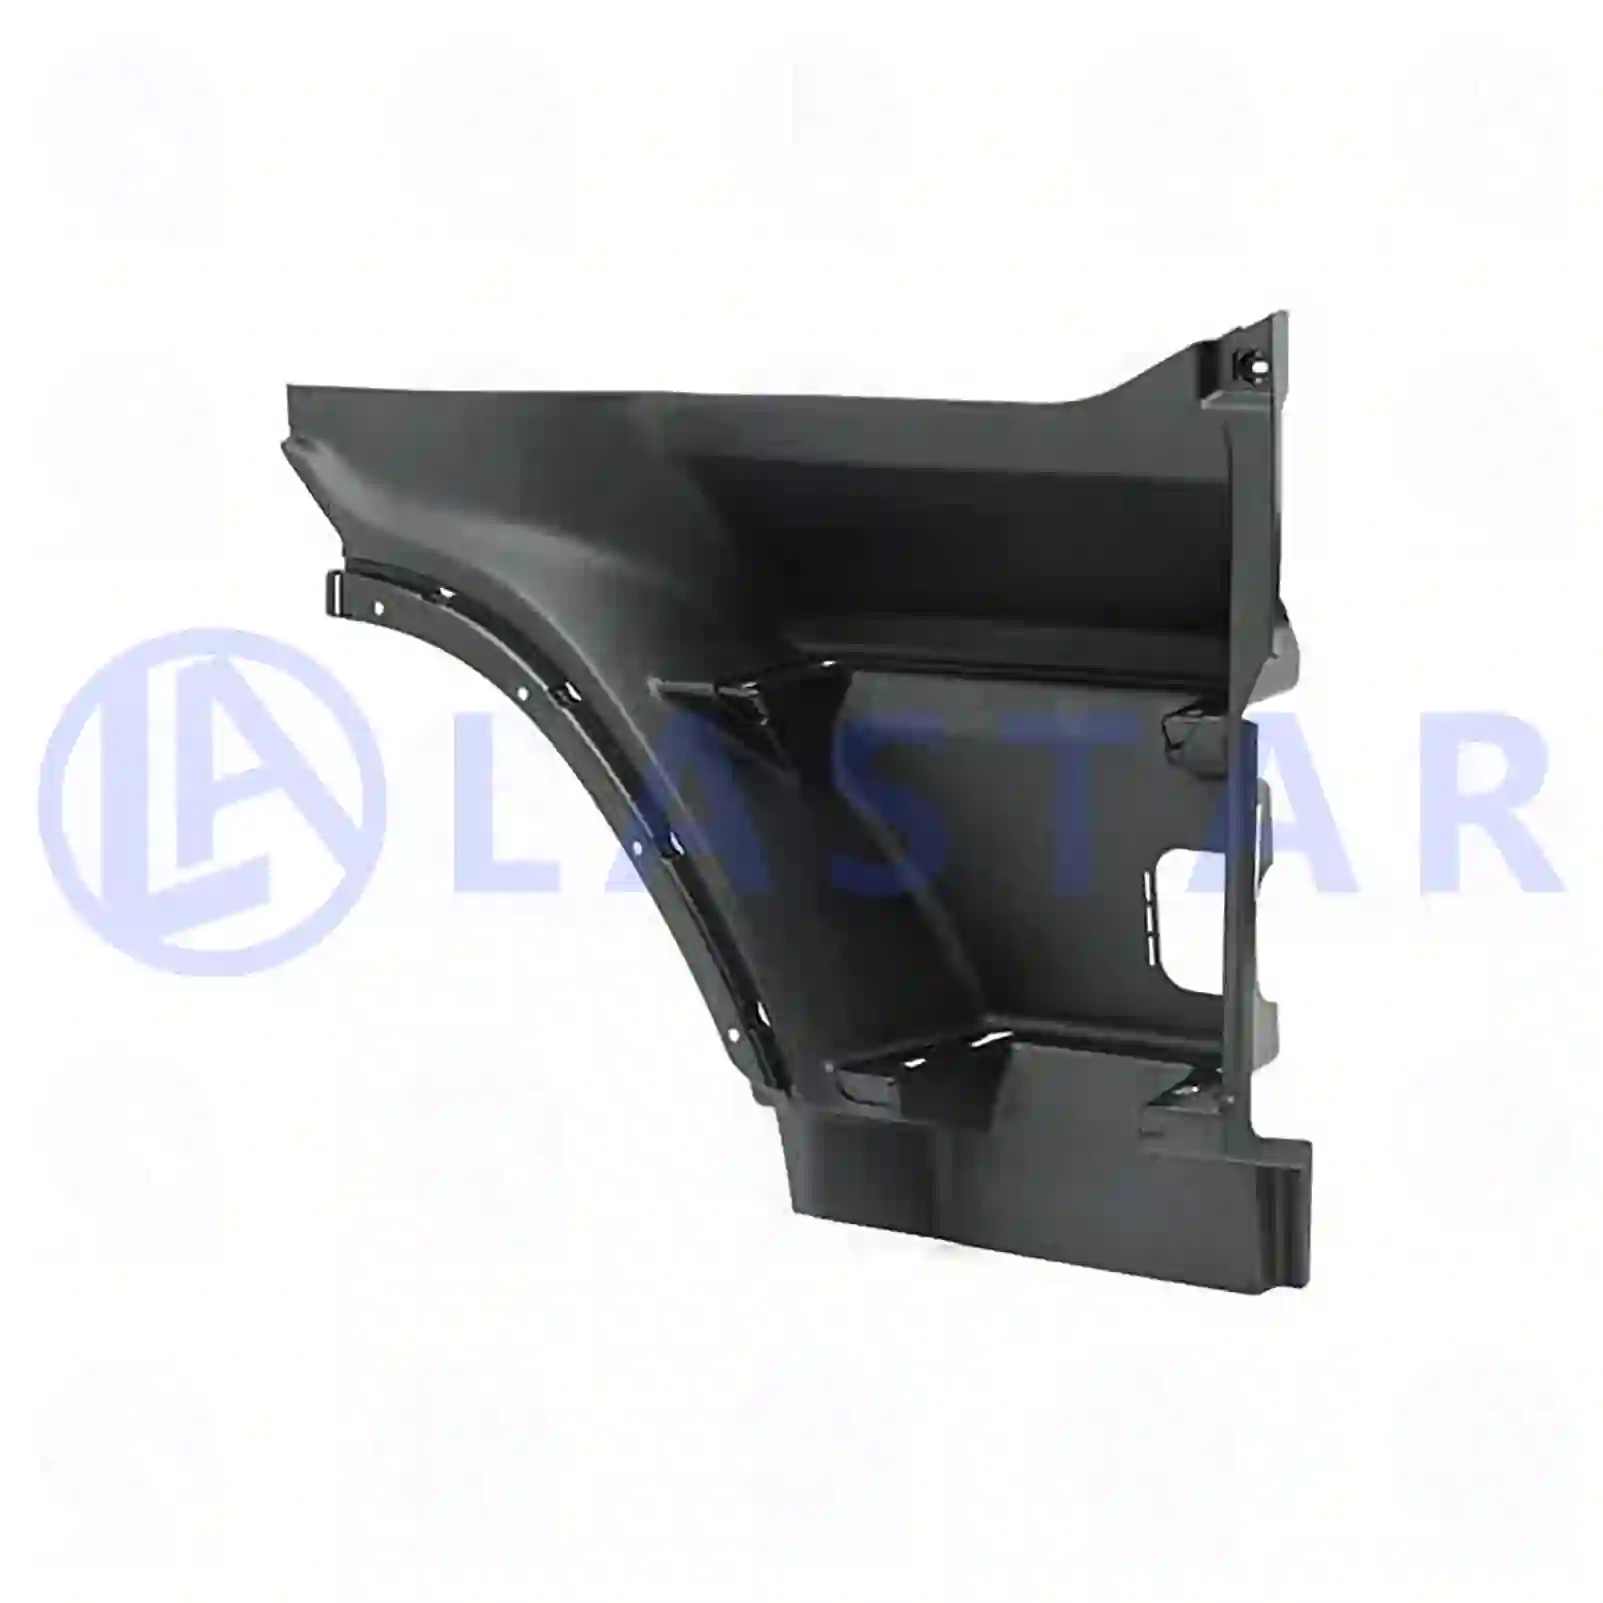 Step well case, right, 77718119, 3175928, ZG61213-0008 ||  77718119 Lastar Spare Part | Truck Spare Parts, Auotomotive Spare Parts Step well case, right, 77718119, 3175928, ZG61213-0008 ||  77718119 Lastar Spare Part | Truck Spare Parts, Auotomotive Spare Parts